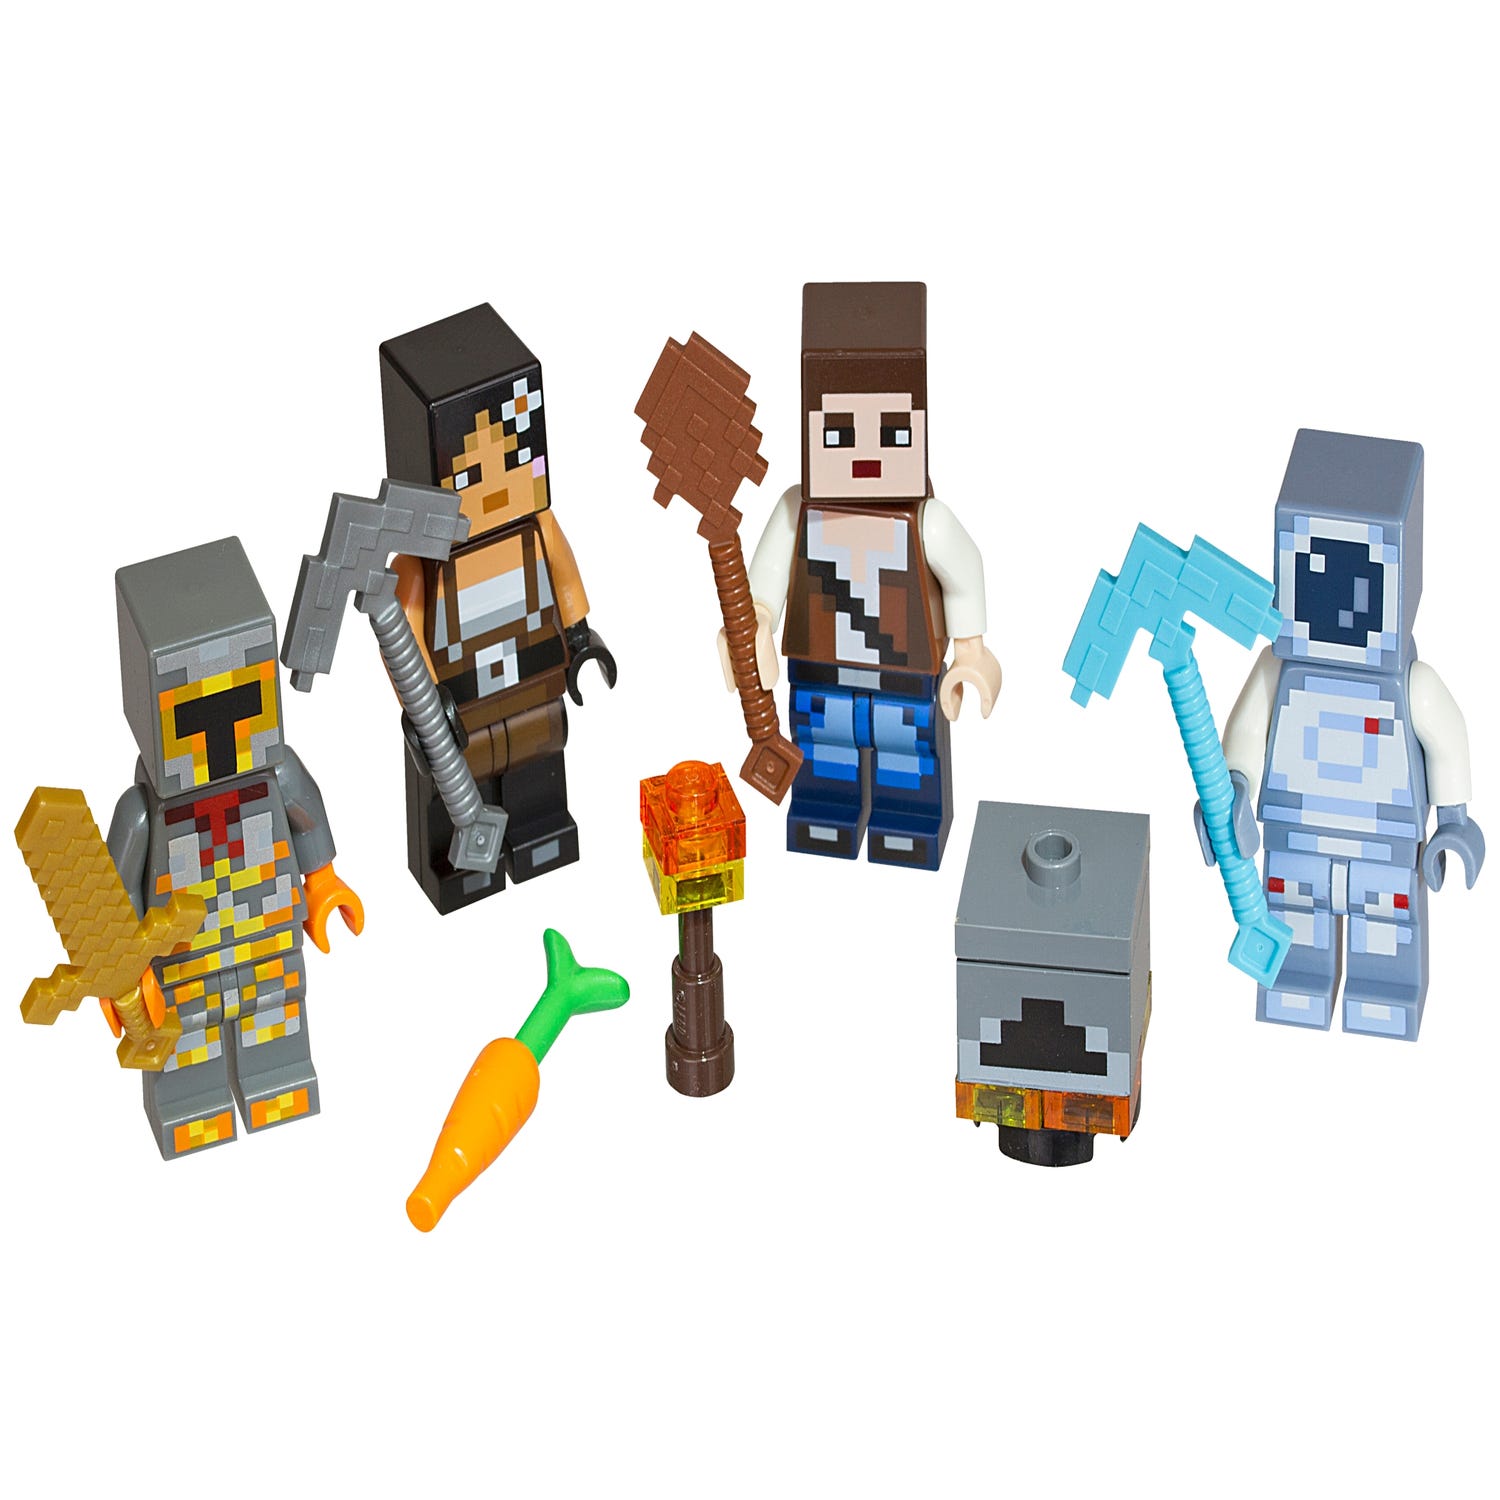 Lego Minecraft Skin Pack 2 Minifigures Buy Online At The Official Lego Shop Us